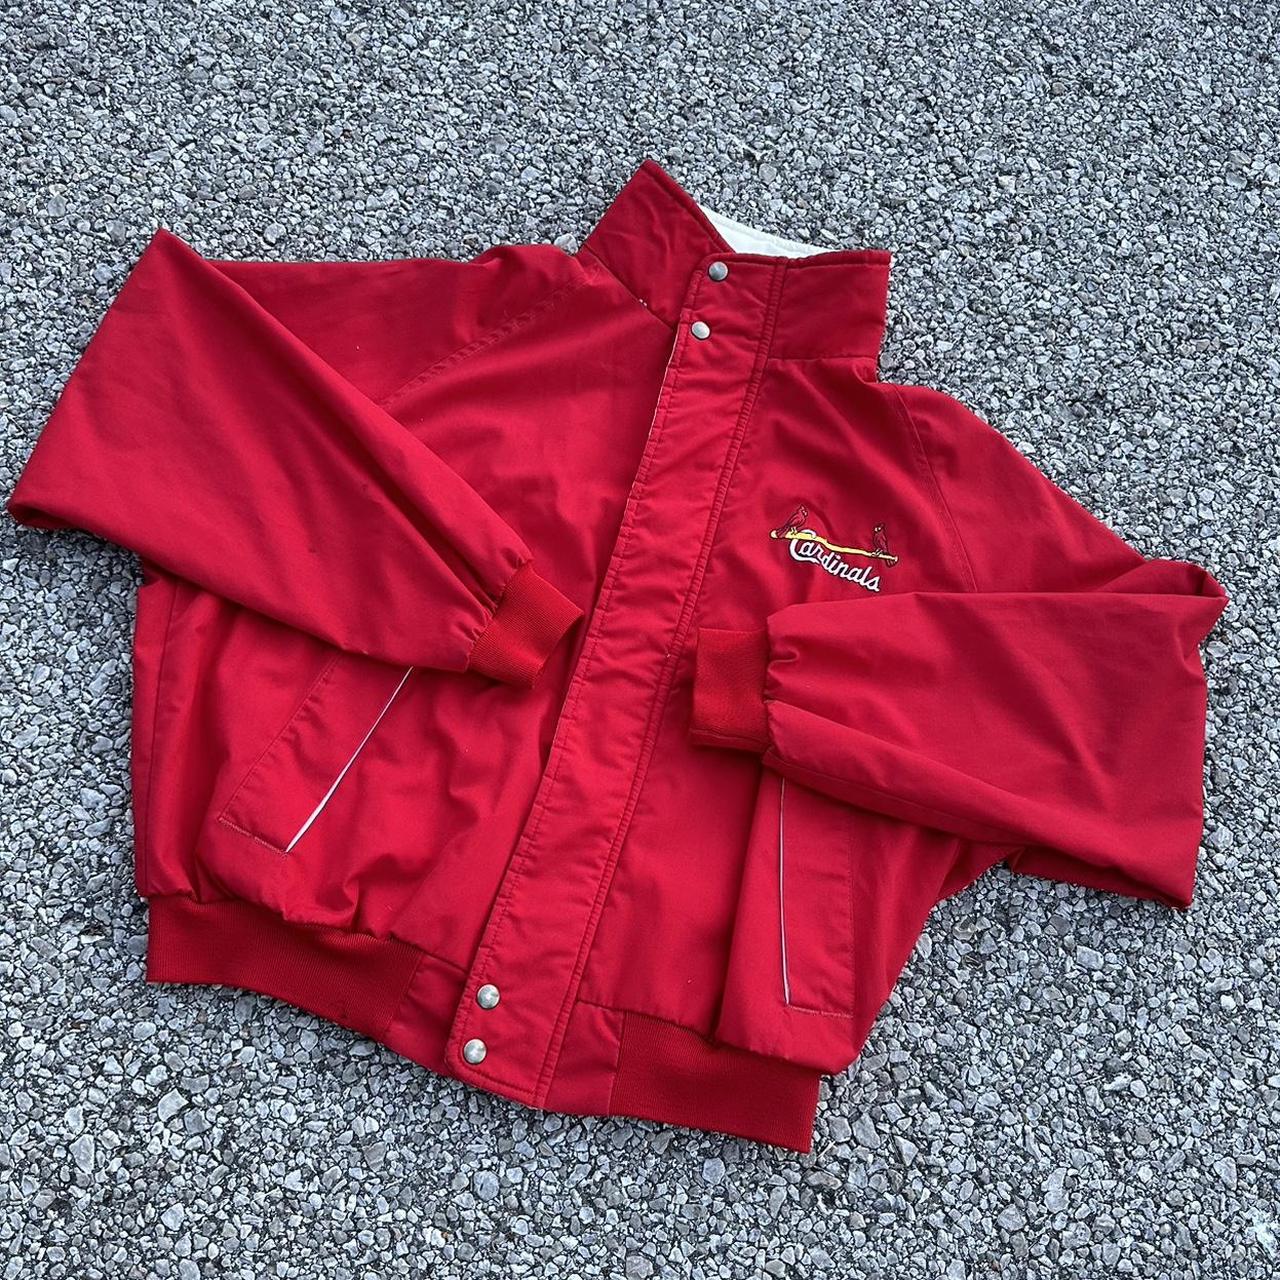 Vintage St. Louis Cardinals jacket in red. From the - Depop